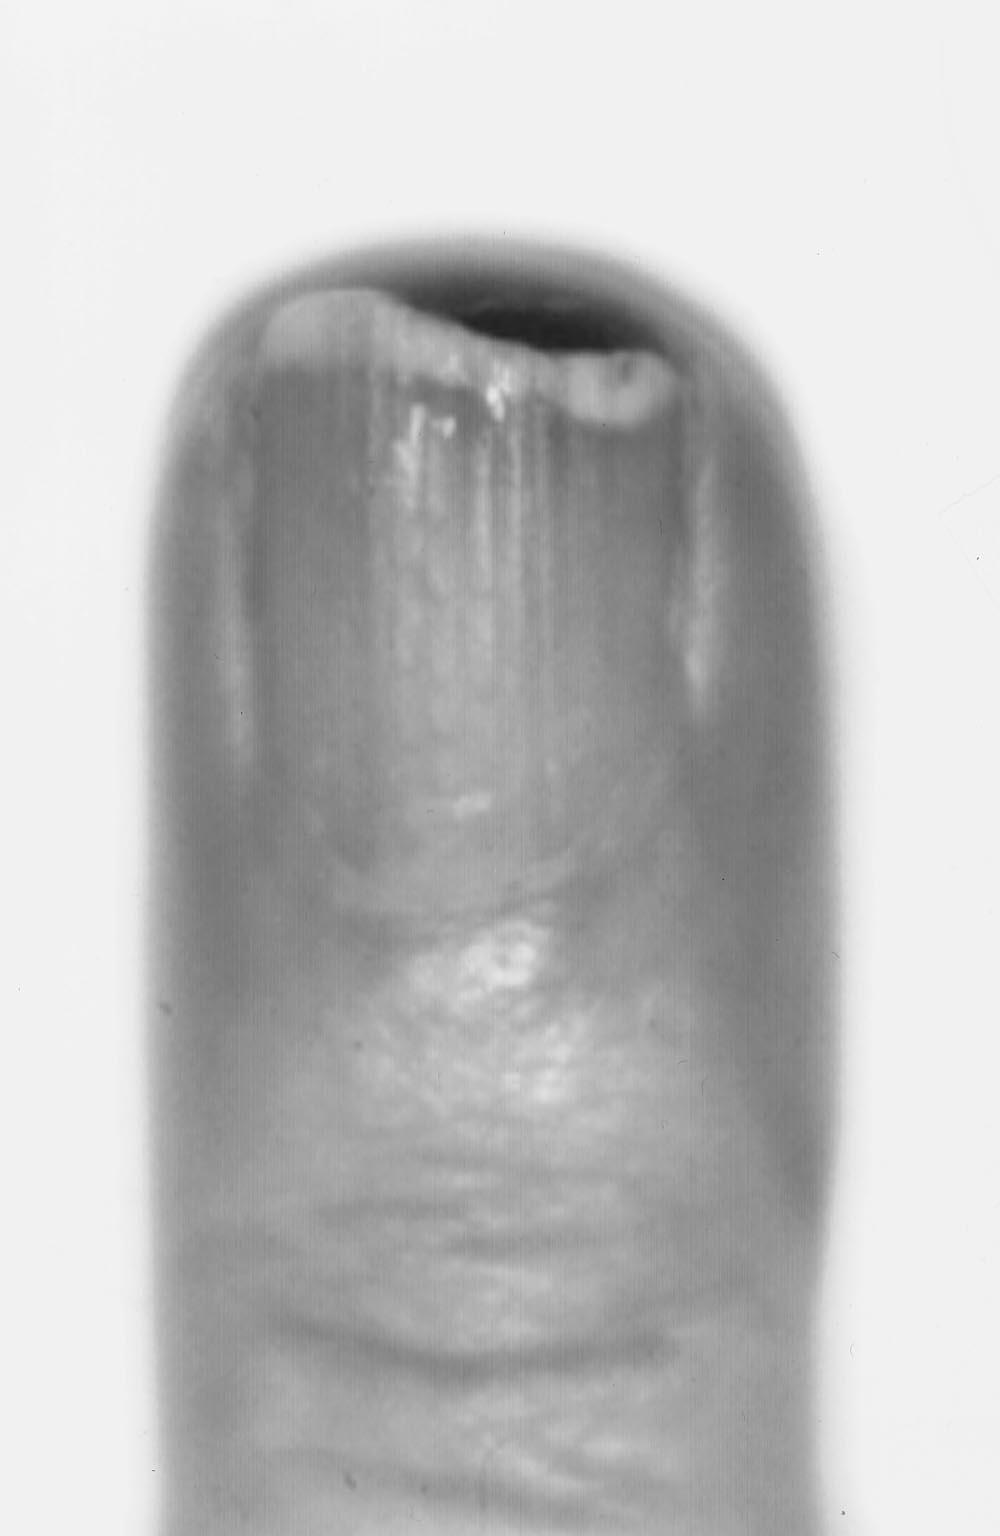 Patient 1 A 66-year-old woman presented with a pigmented lesion on the tip of her right fourth finger. The lesion had been present for 1 year. The biopsy specimen demonstrated a 1.